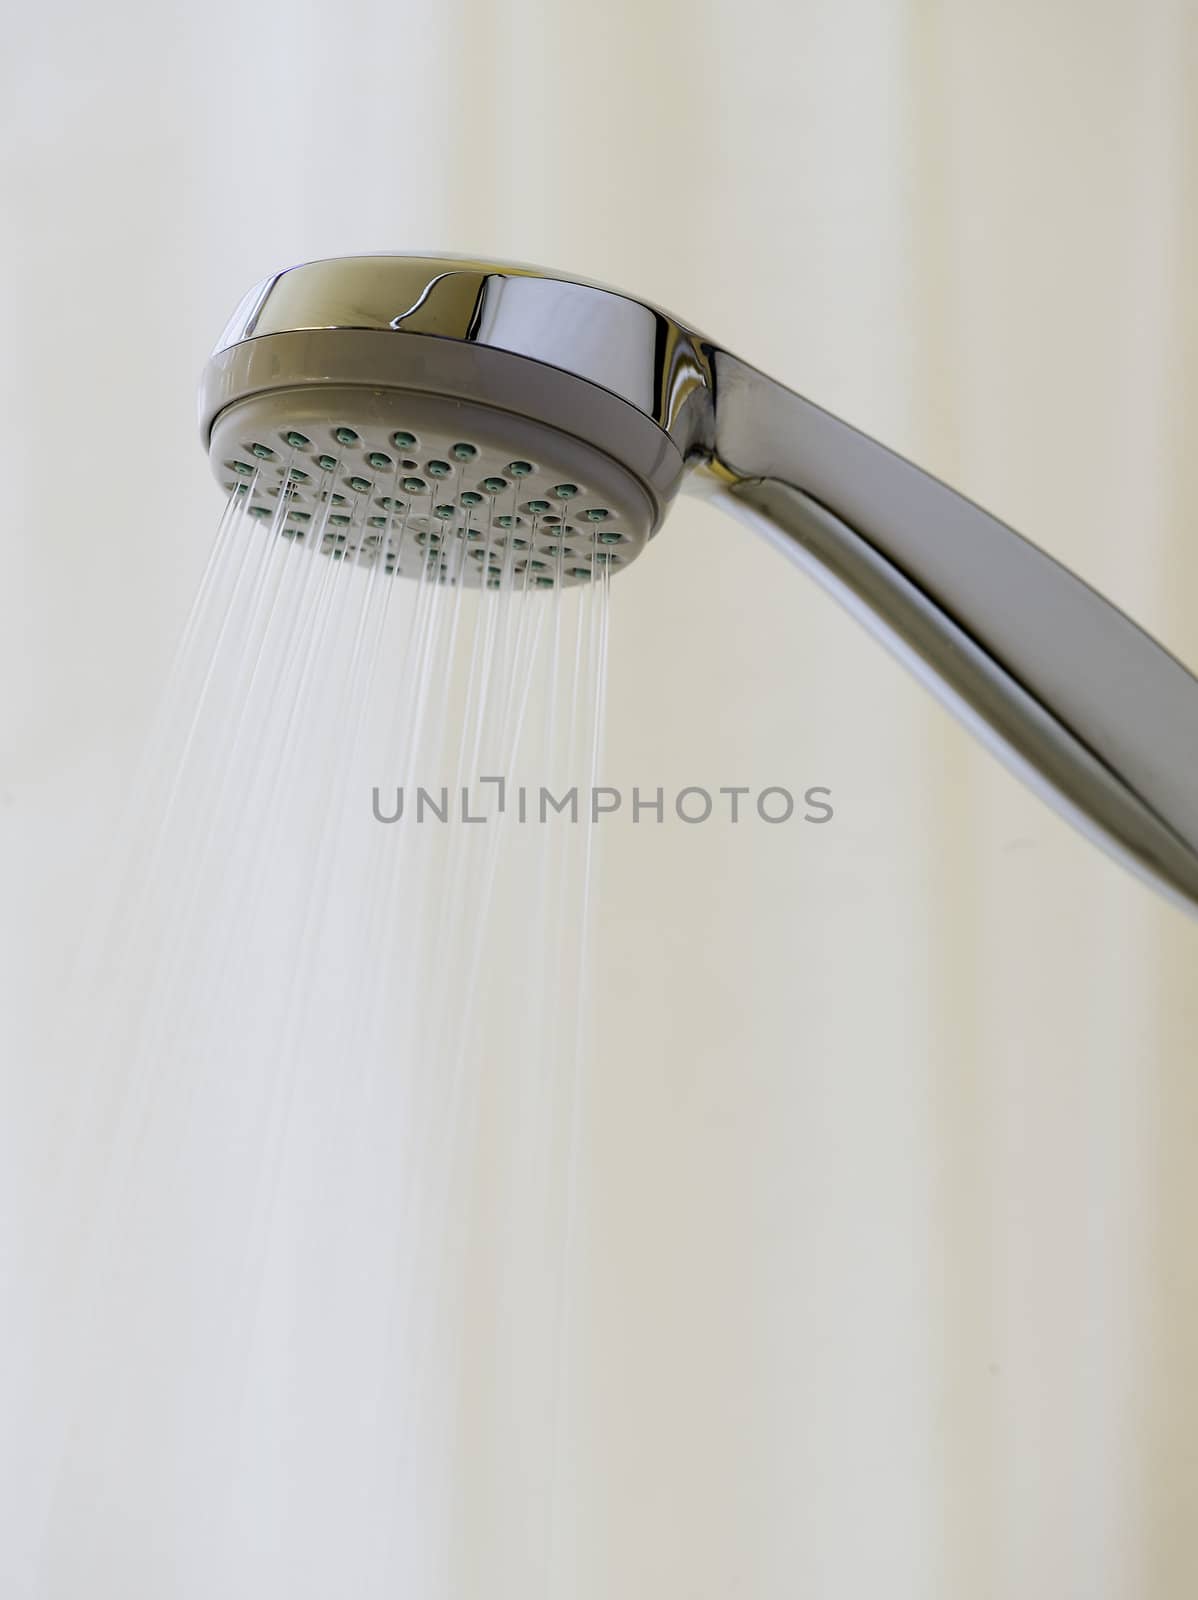 Showerhead with spraying water on background